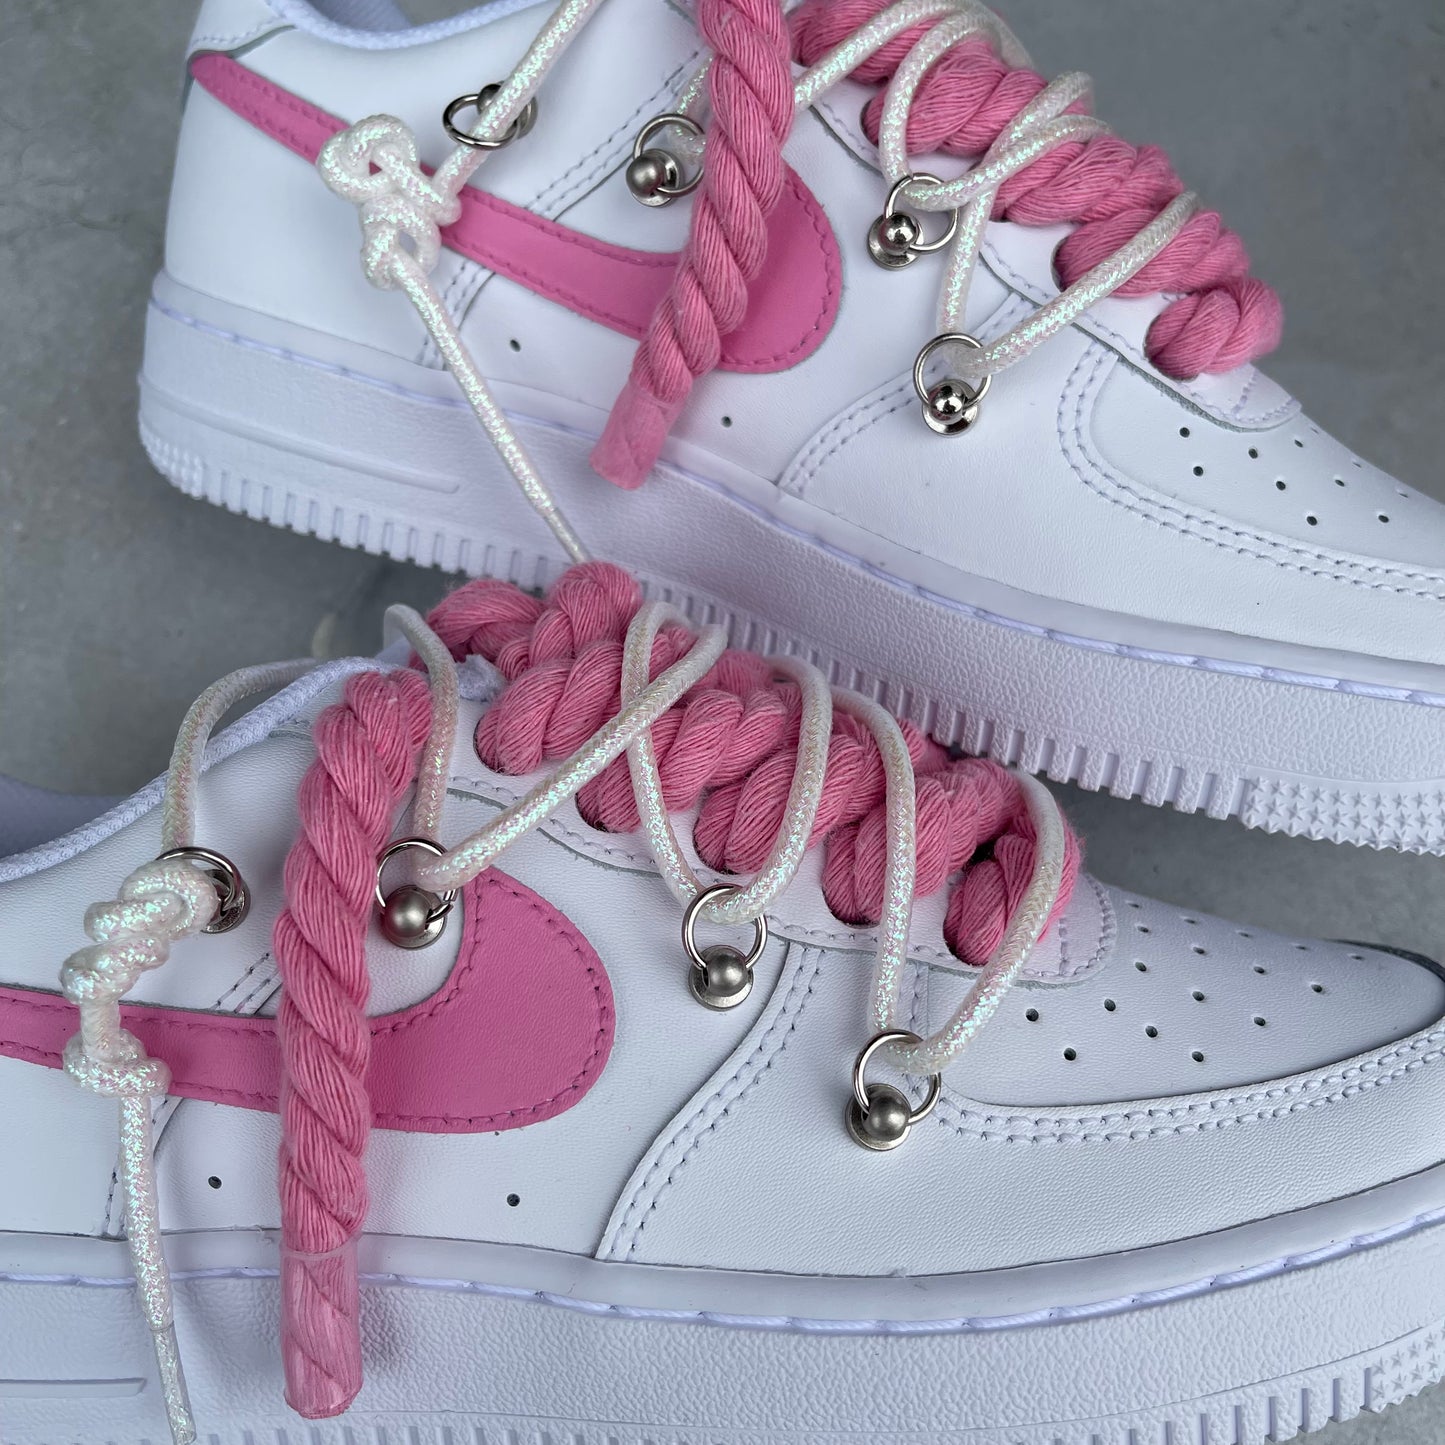 Custom AIR FORCE 1 - Pink lot (rope laces)